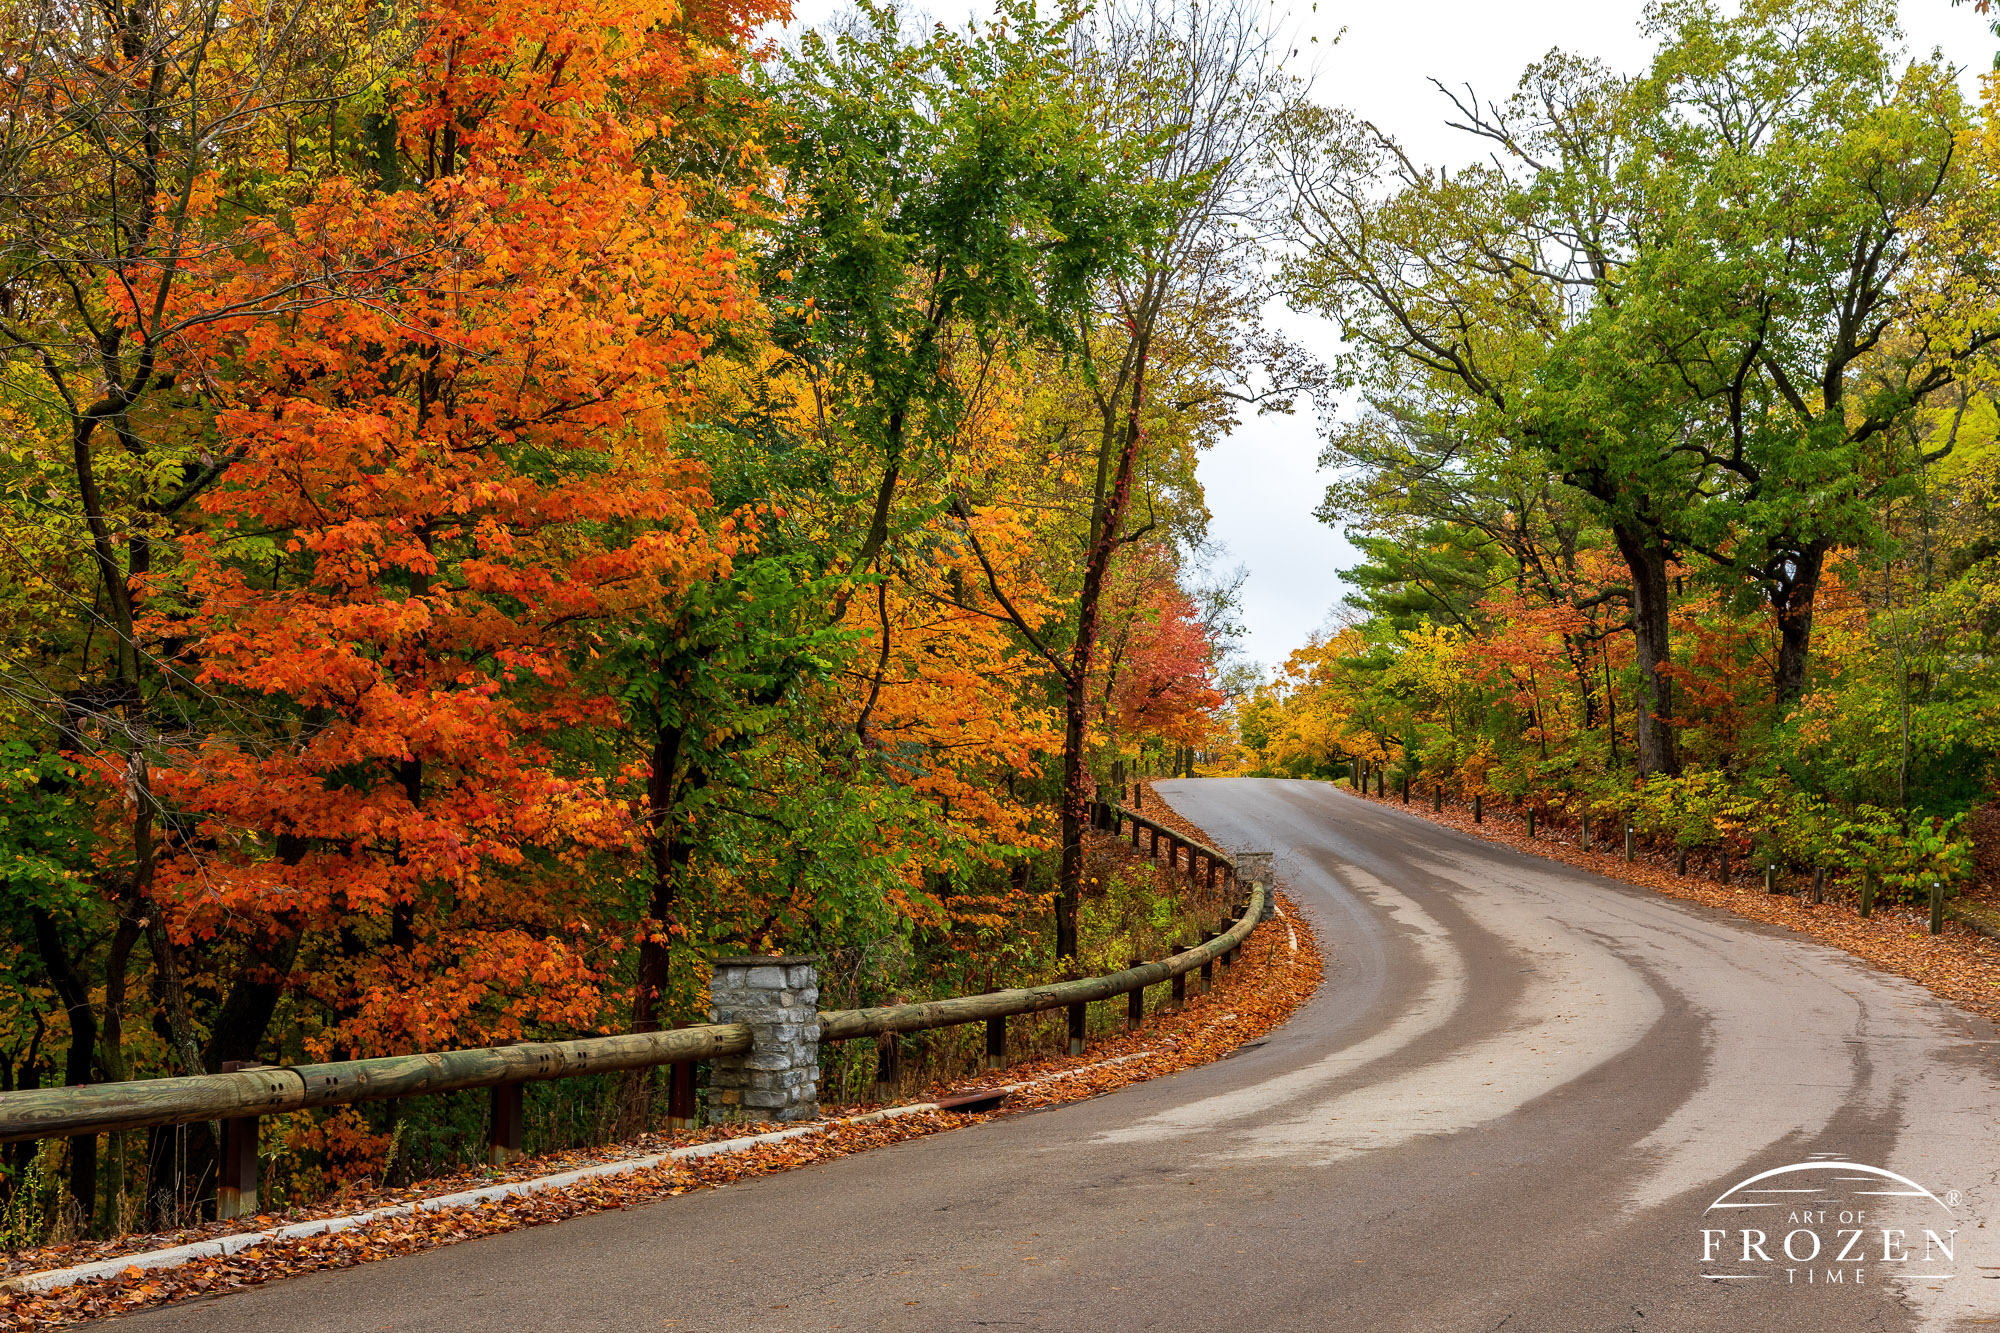 A country road winds its way through a forest during autumn where the trees display vivid fall colors